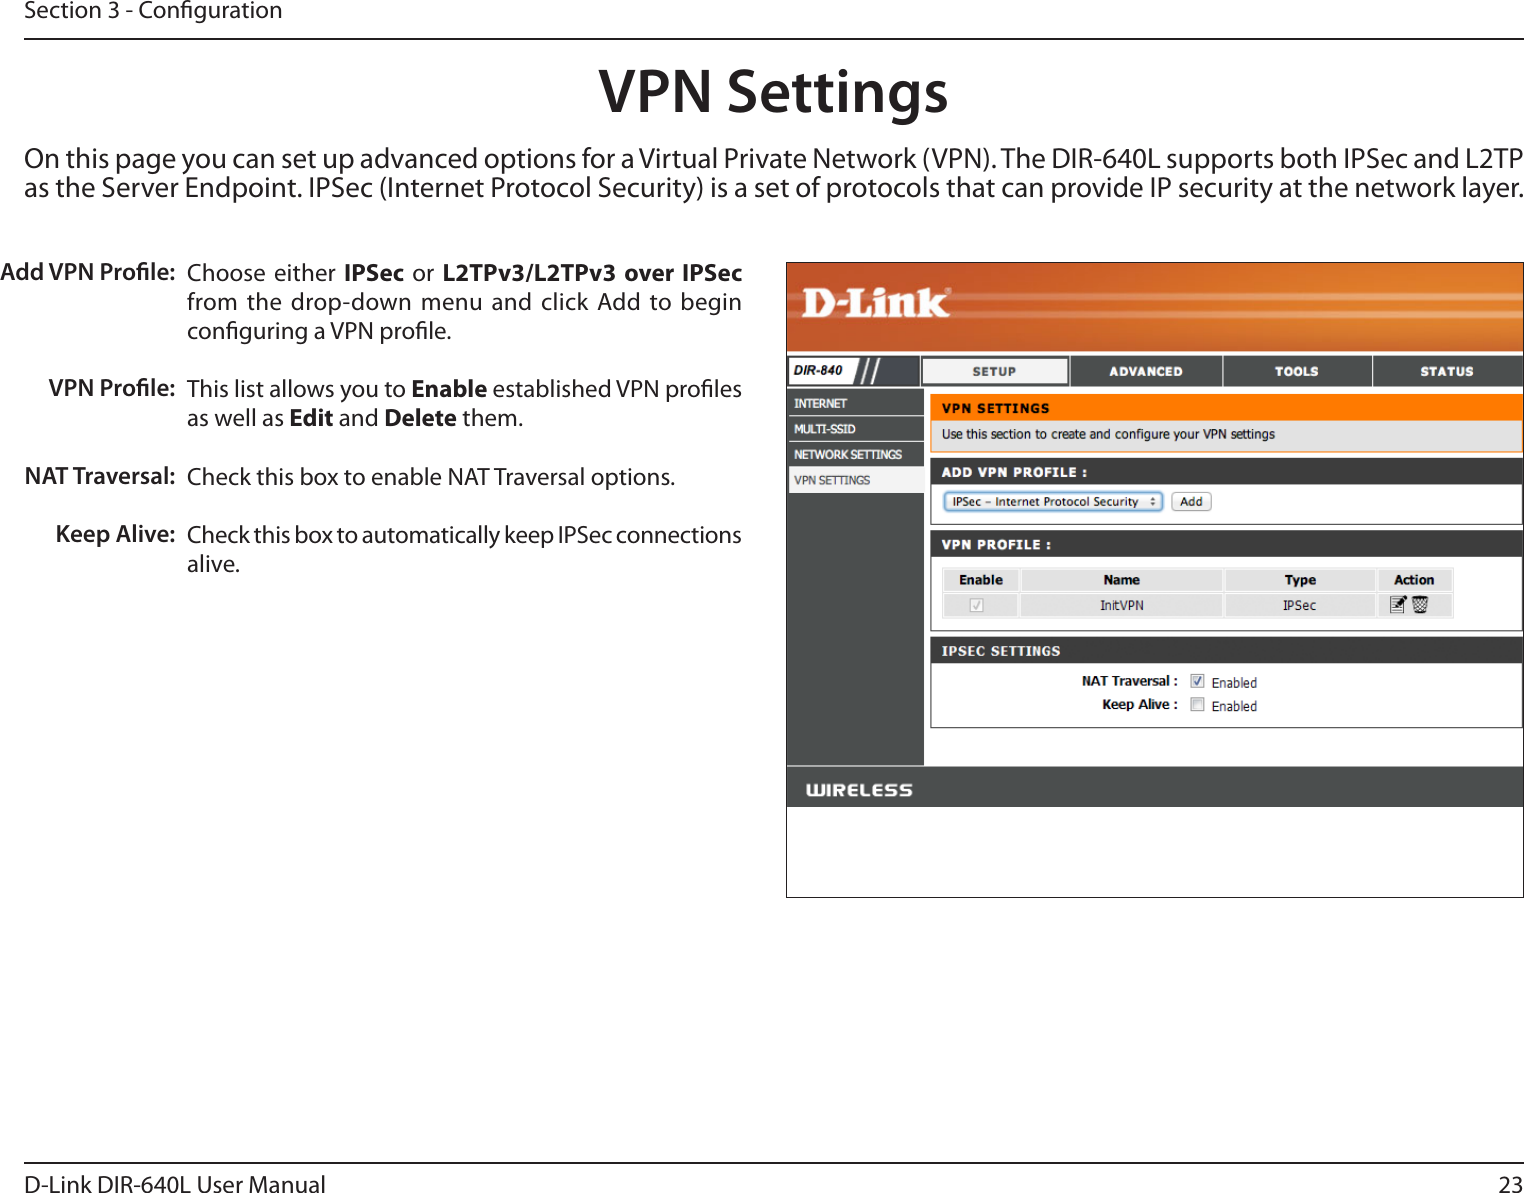 23D-Link DIR-640L User ManualSection 3 - CongurationChoose either  IPSec  or  L2TPv3/L2TPv3 over IPSec from the  drop-down  menu and  click  Add  to  begin conguring a VPN prole.This list allows you to Enable established VPN proles as well as Edit and Delete them.Check this box to enable NAT Traversal options.Check this box to automatically keep IPSec connections alive.Add VPN Prole:VPN Prole:NAT Traversal:Keep Alive:On this page you can set up advanced options for a Virtual Private Network (VPN). The DIR-640L supports both IPSec and L2TP as the Server Endpoint. IPSec (Internet Protocol Security) is a set of protocols that can provide IP security at the network layer.VPN Settings